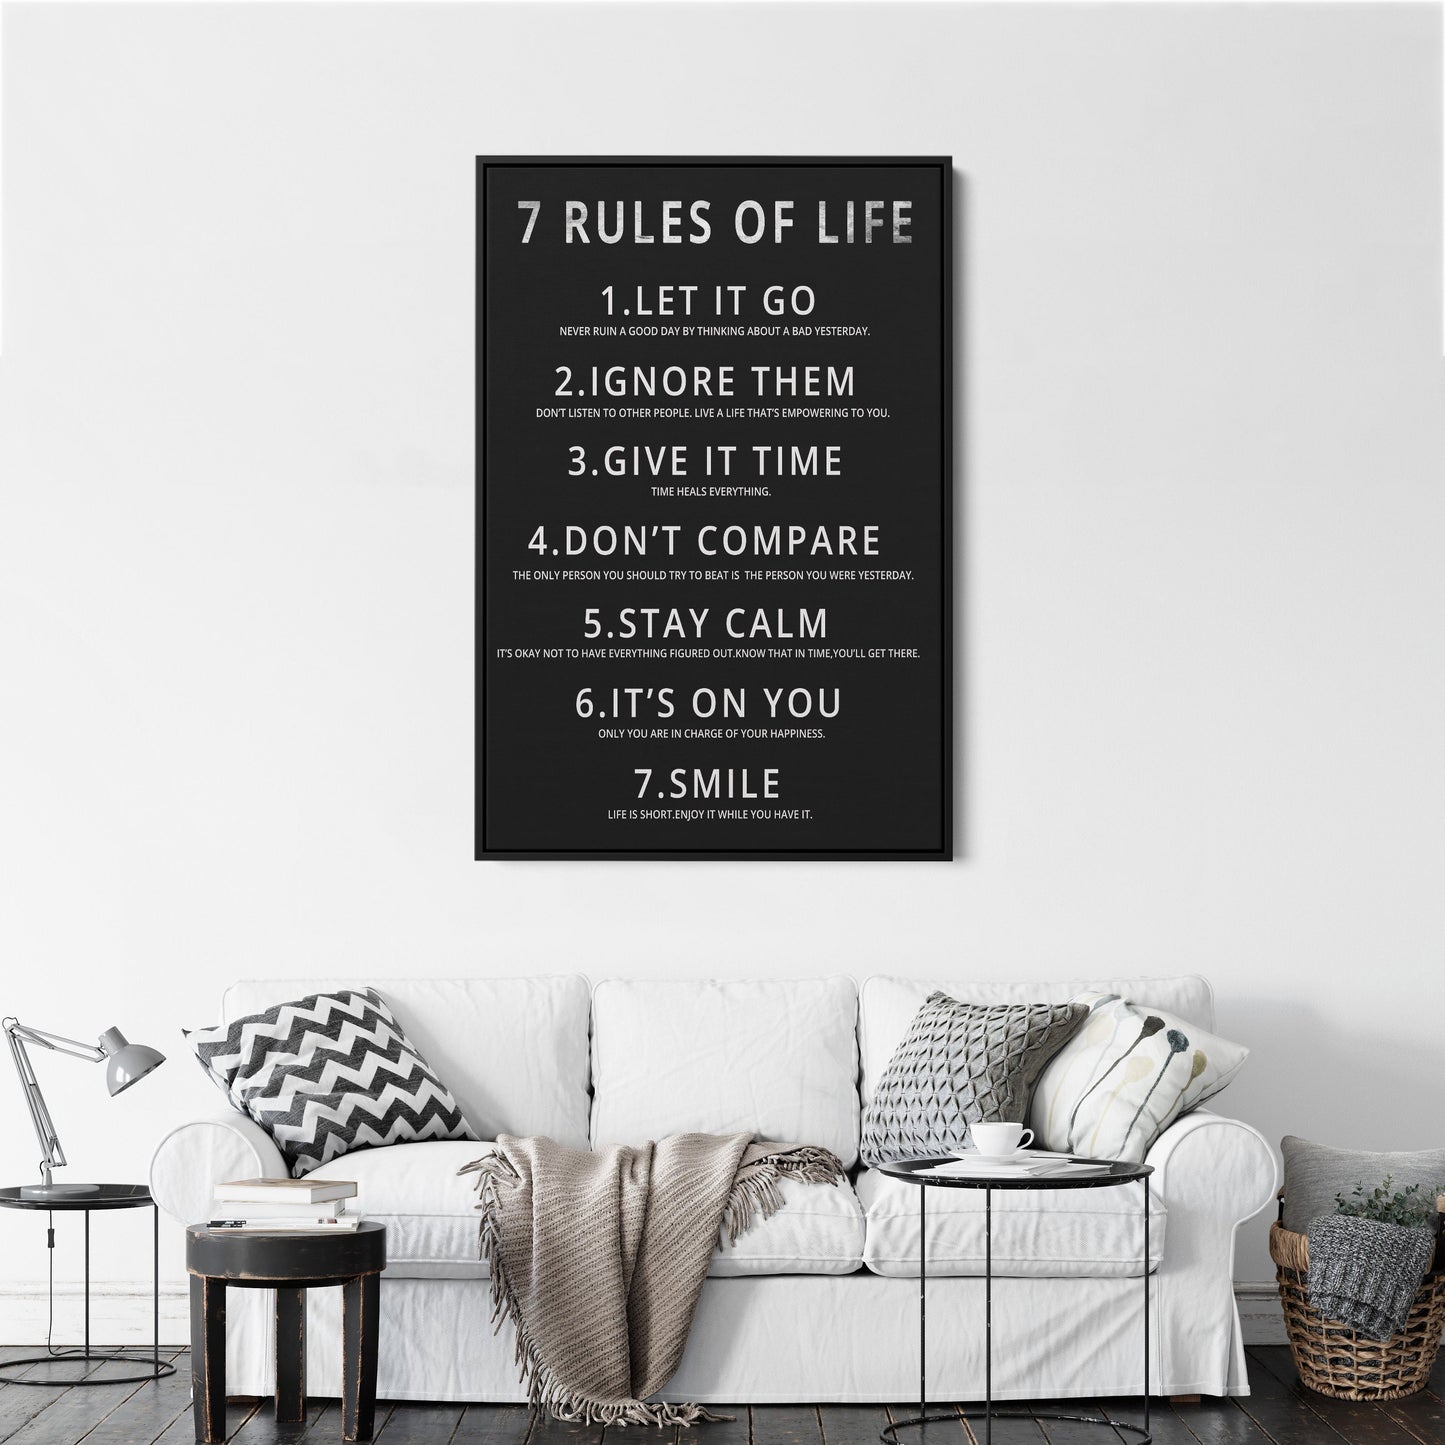 7 RULES OF LIFE - Canvas